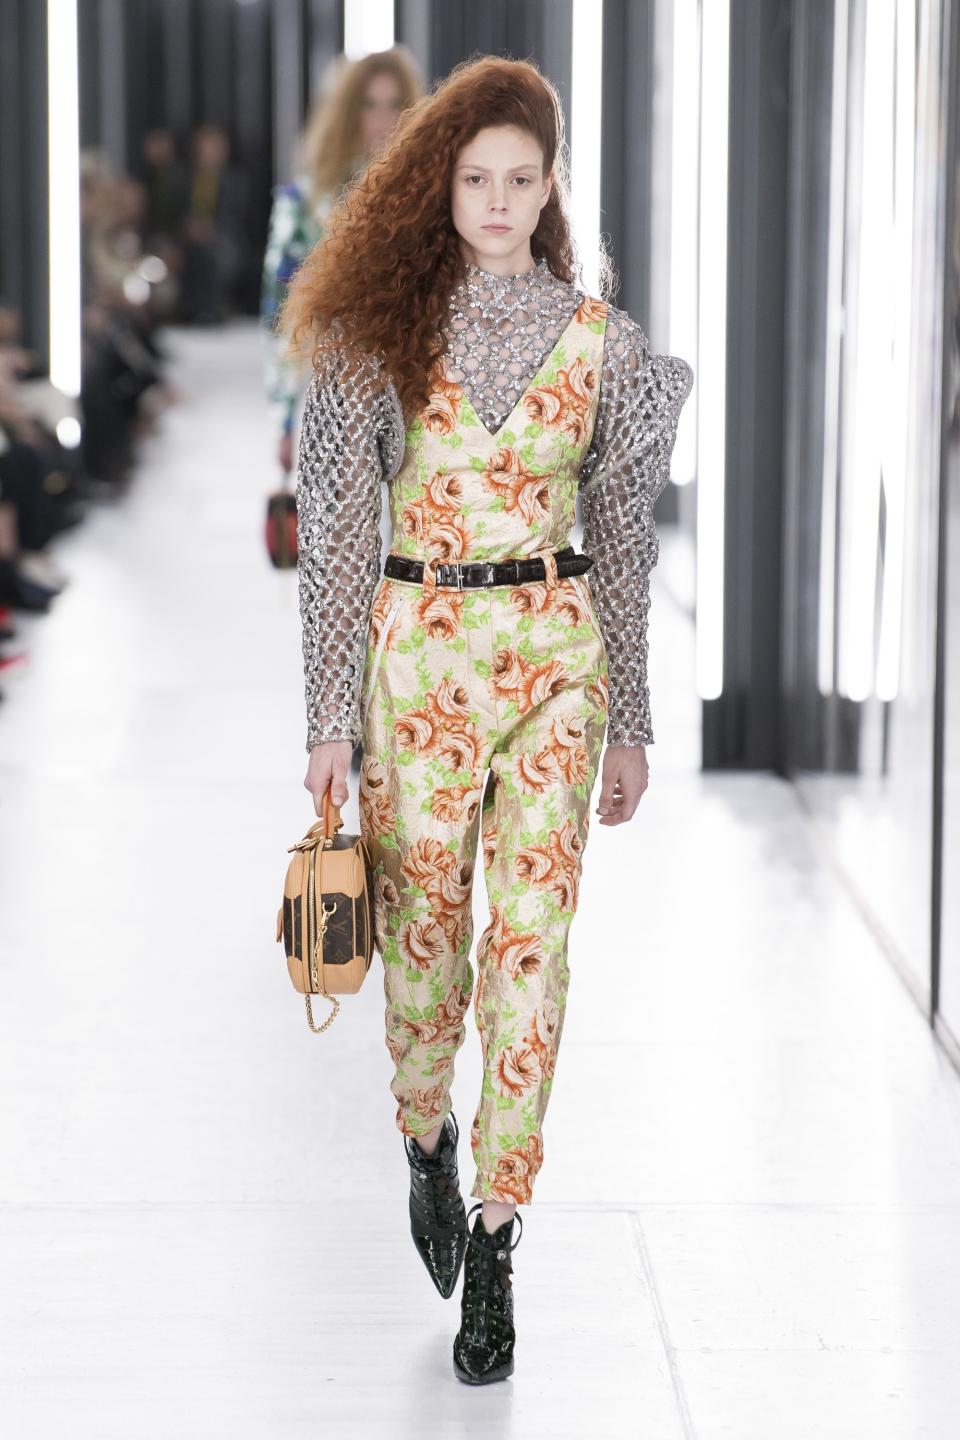 Louis Vuitton’s Spring 2019 look elevates the jumpsuit with floral printing and a chain mail top.